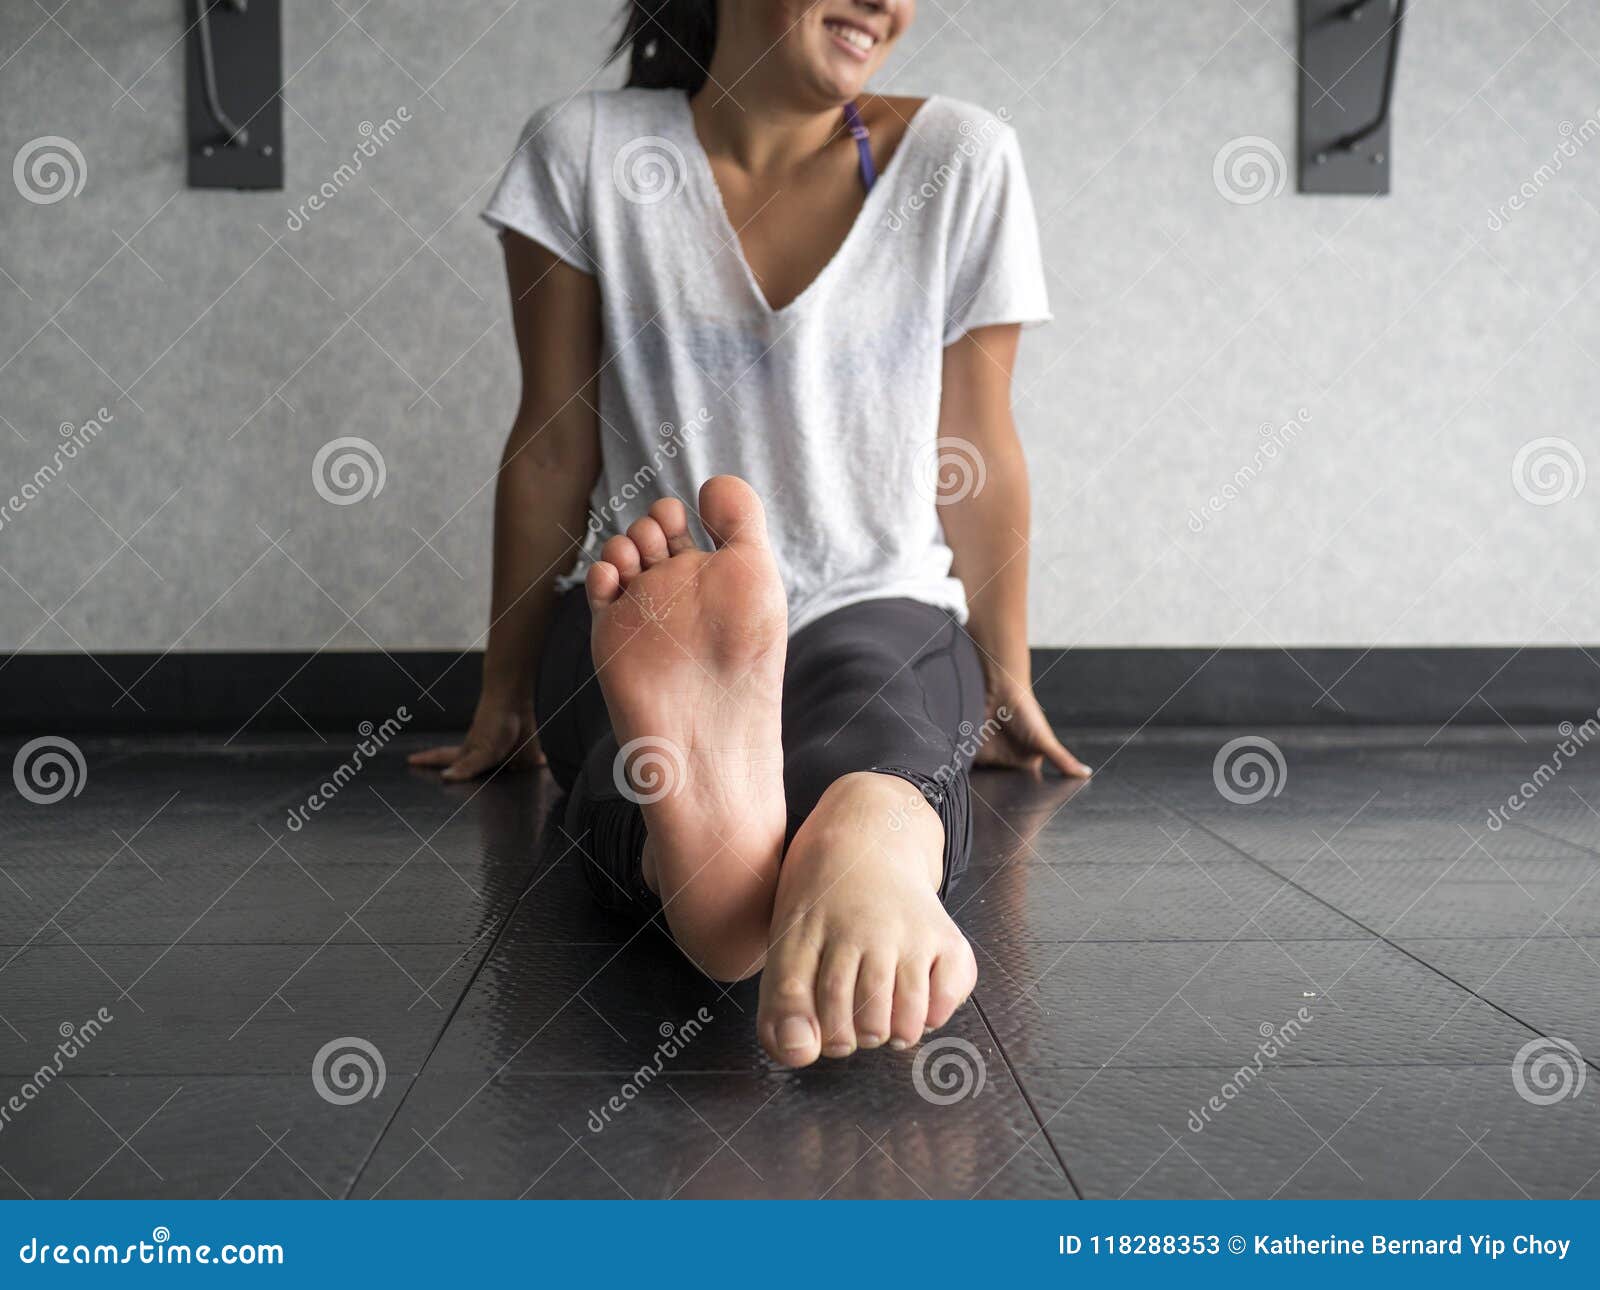 Smiling Dancer Warming Up Her Feet With Alternating Pointing And Flexing Stock Image Image Of